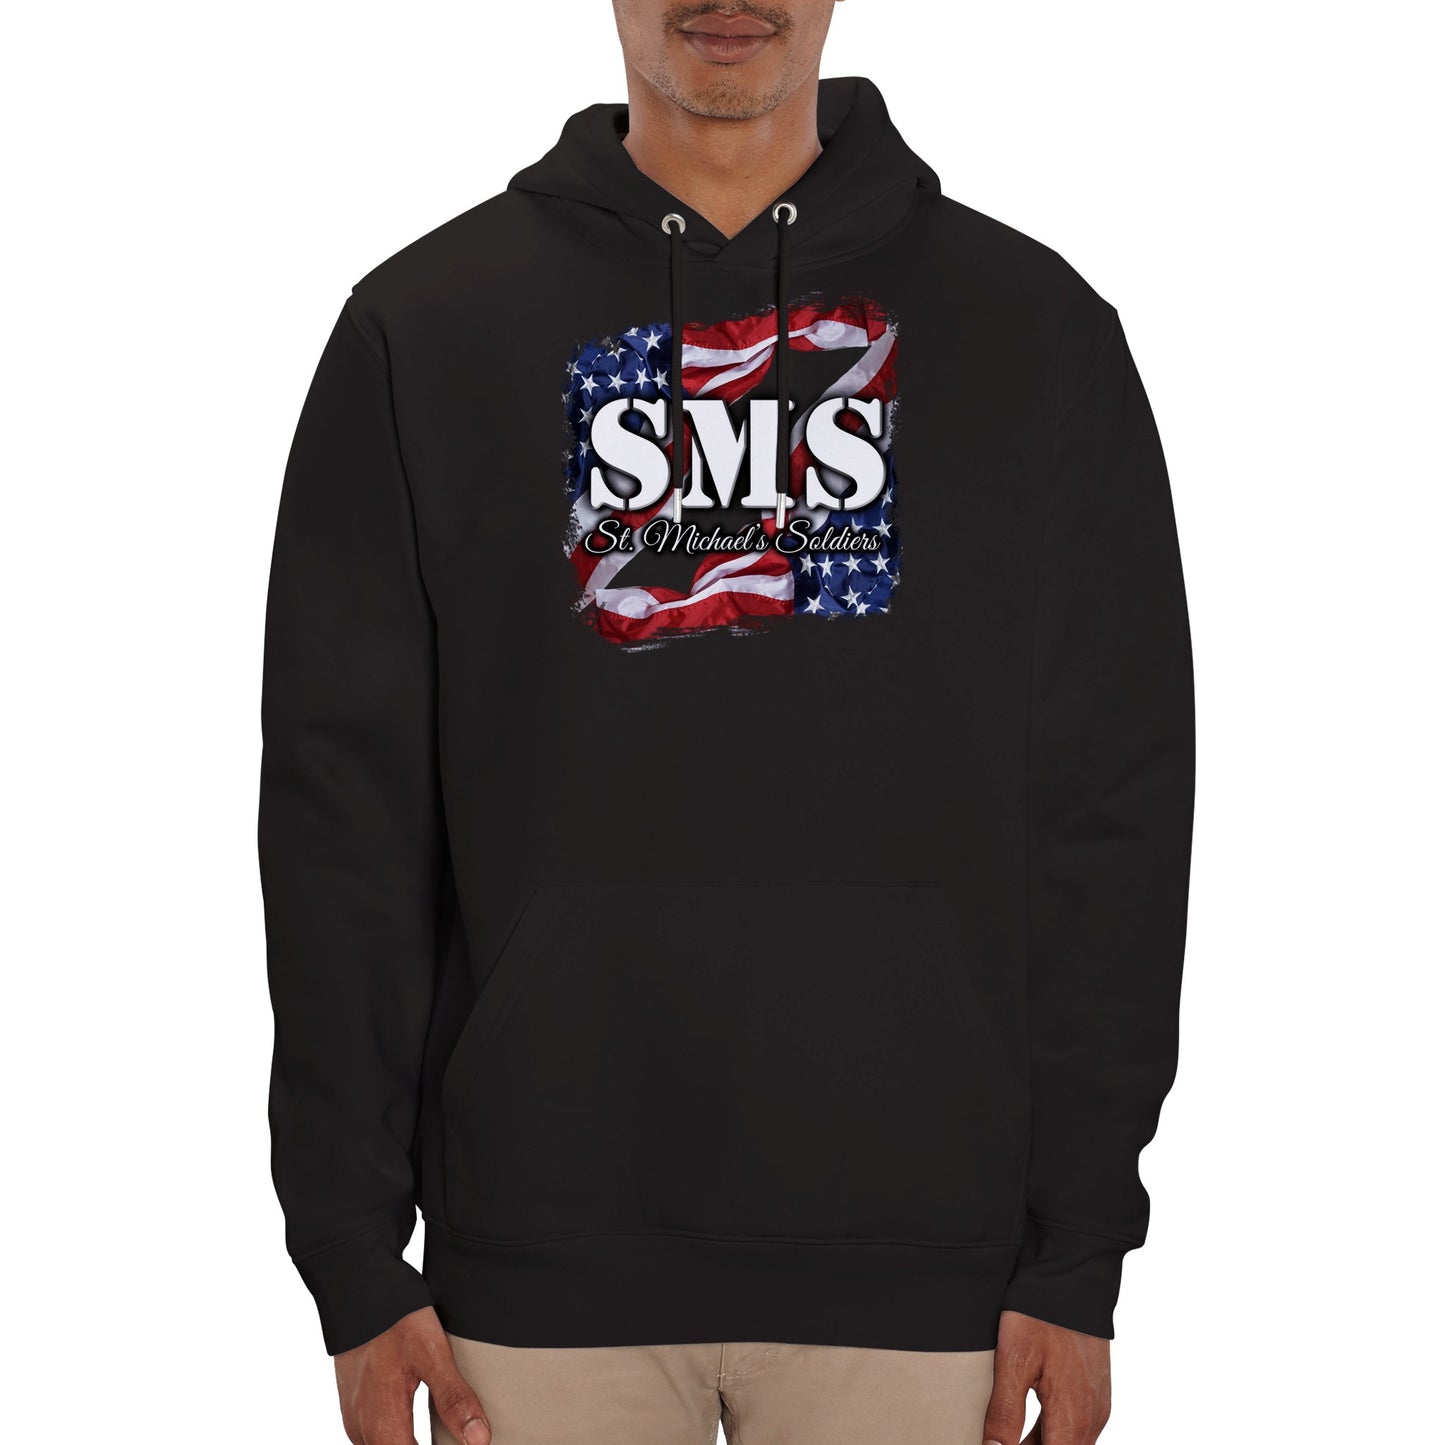 SMS (Flag1)  - Organic Unisex Pullover Hoodie